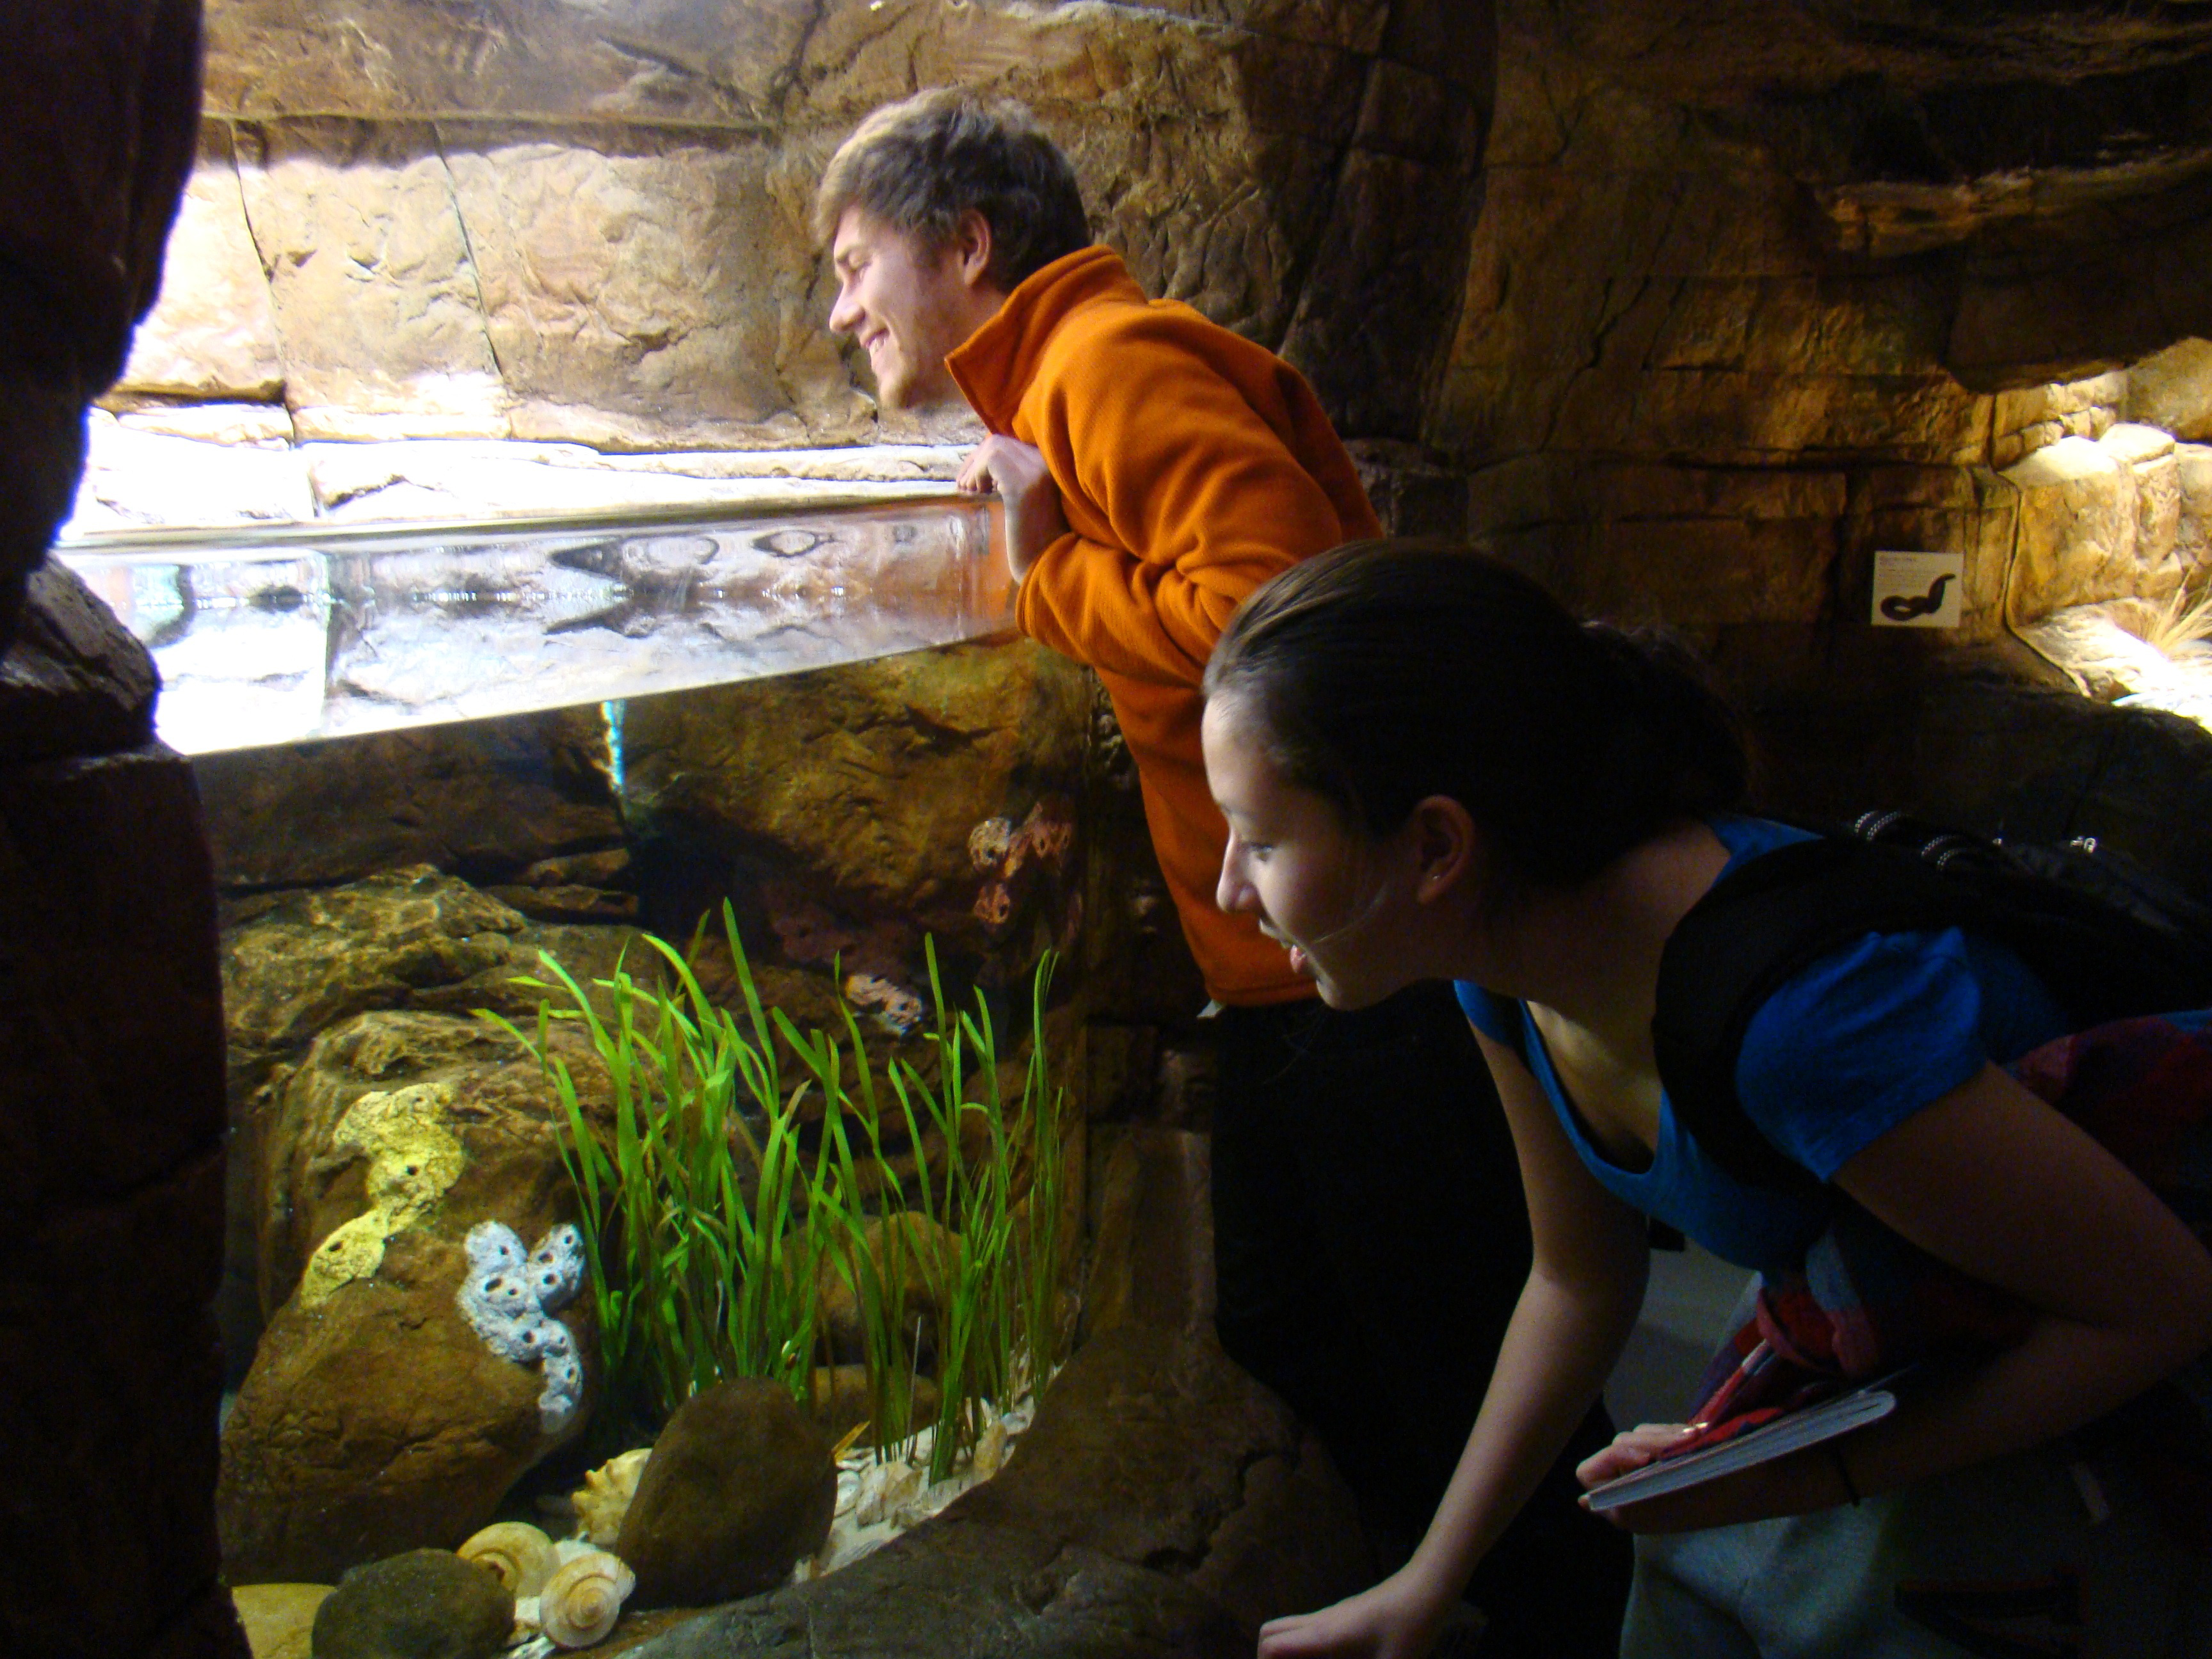 Wilson Deming and Diane Palko look at fish in a tank at a zoo